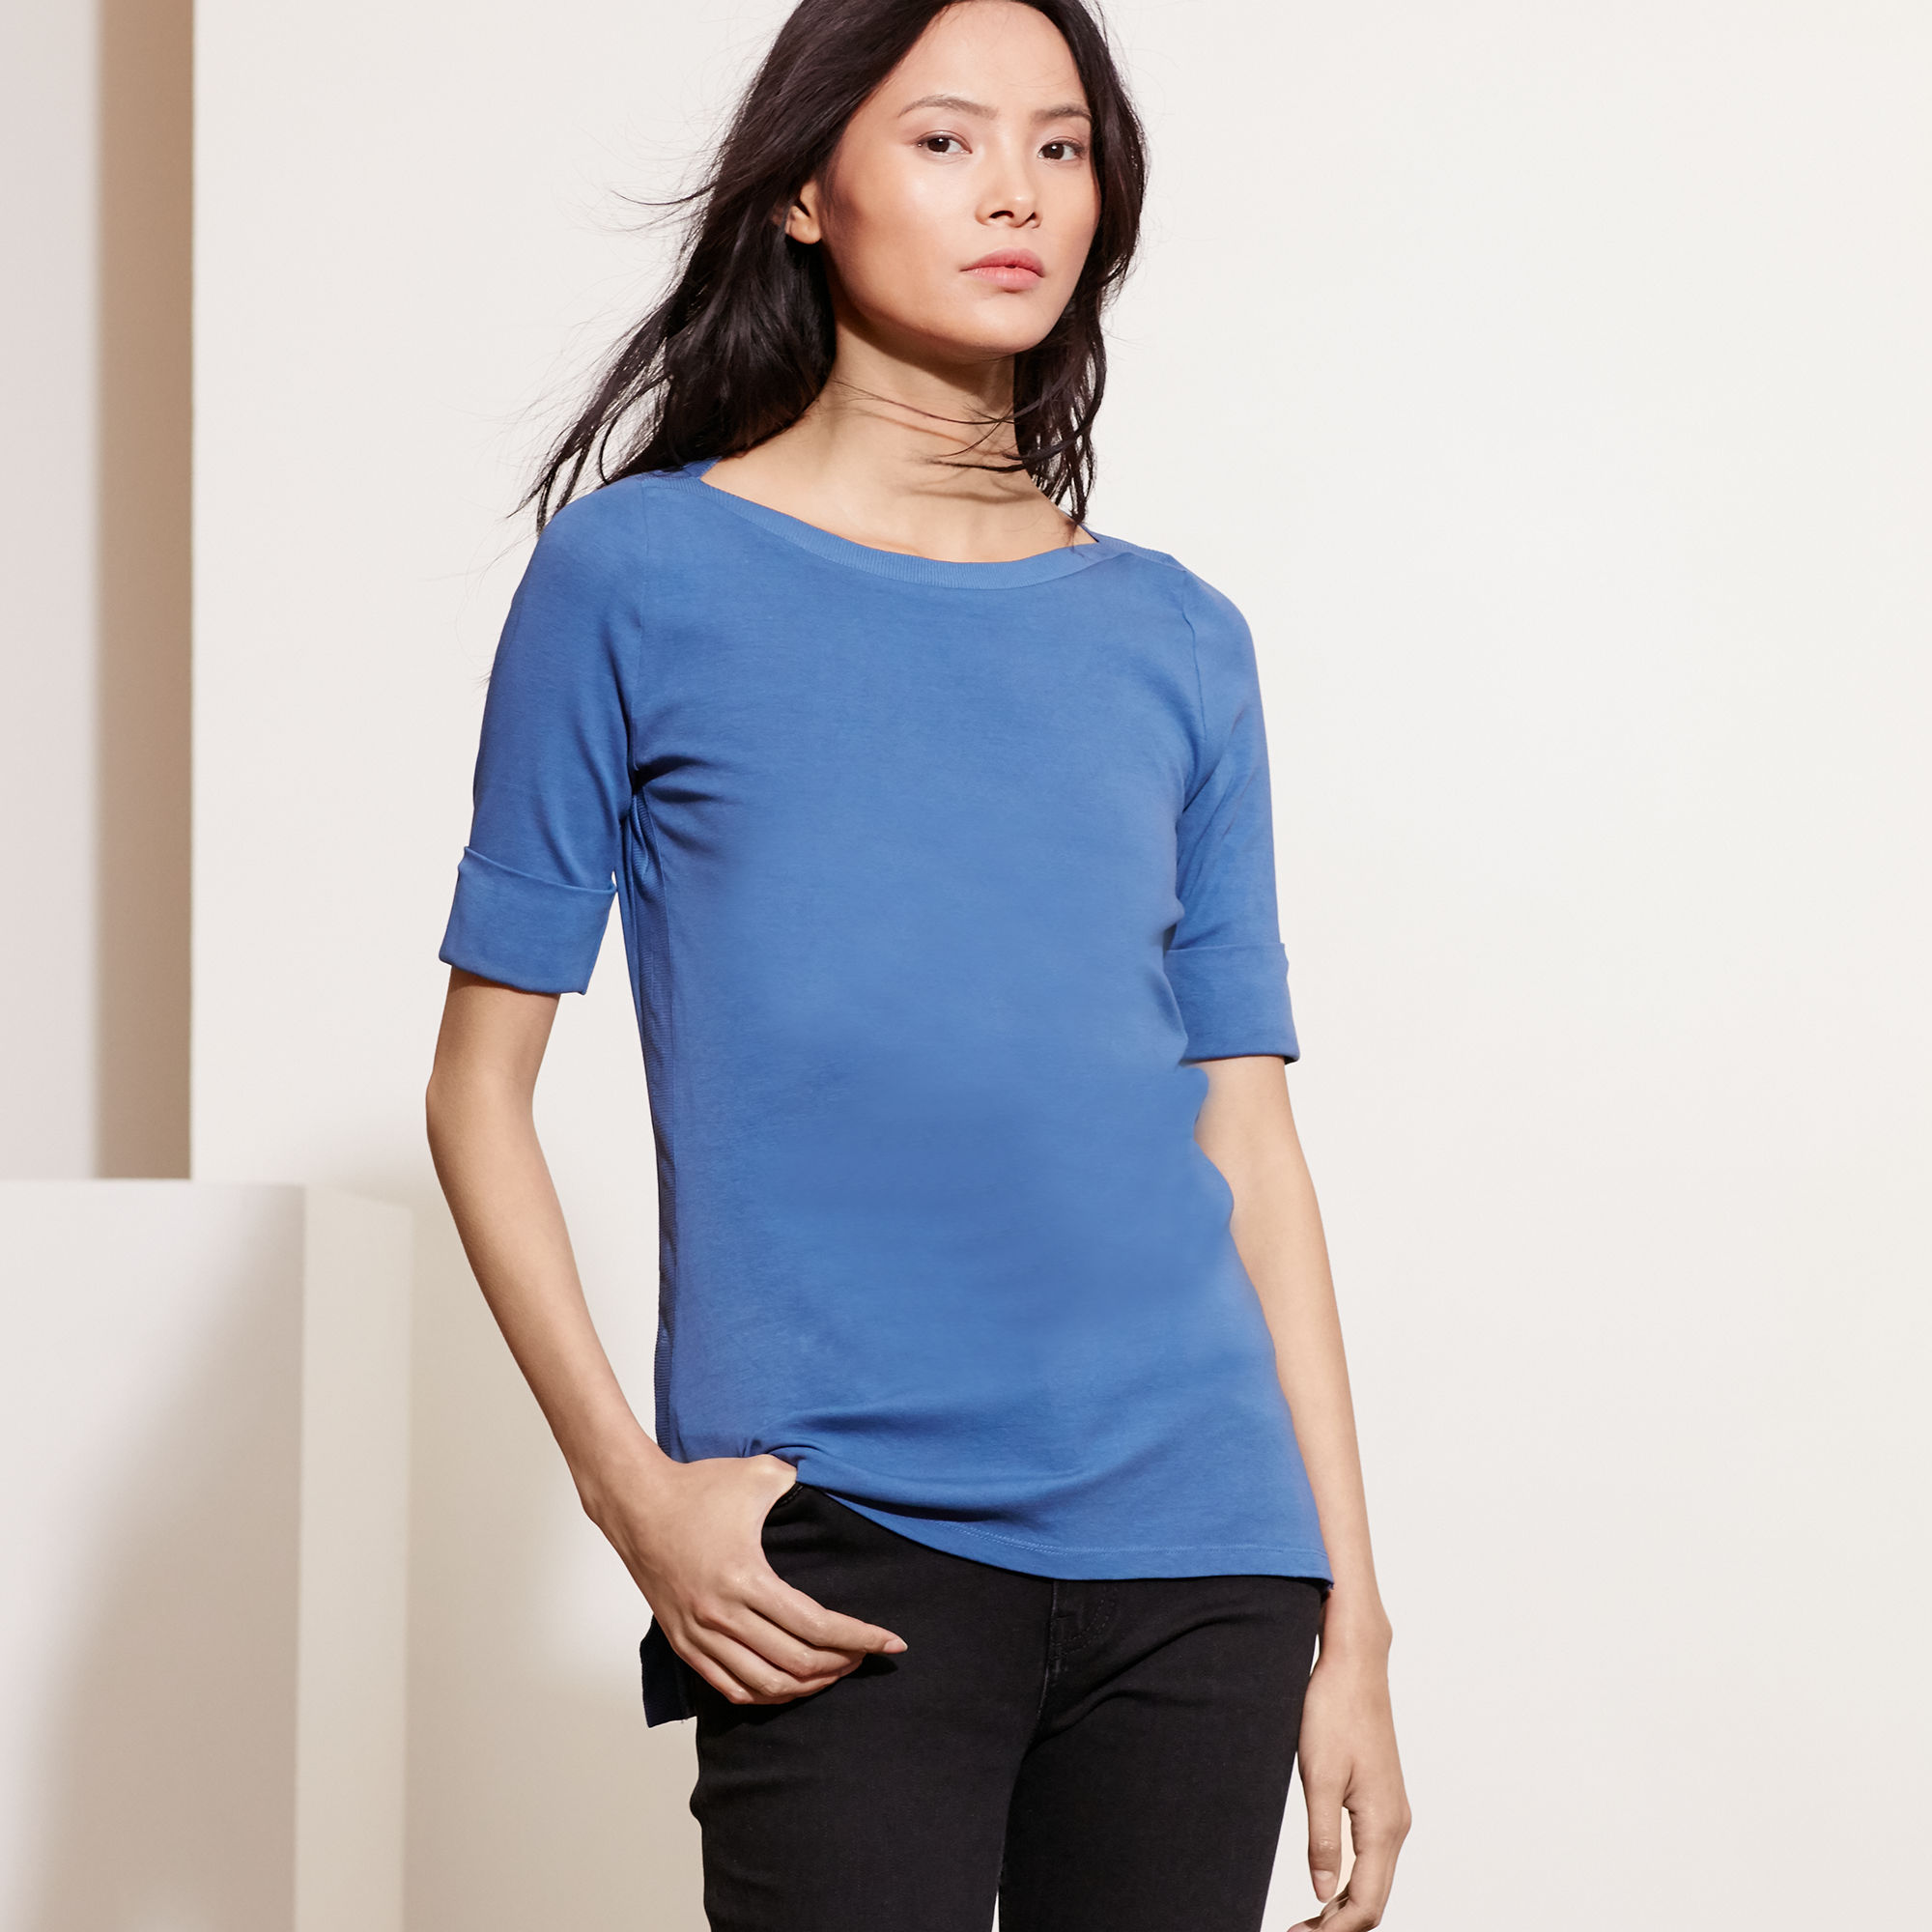 Stretch cotton boatneck tee